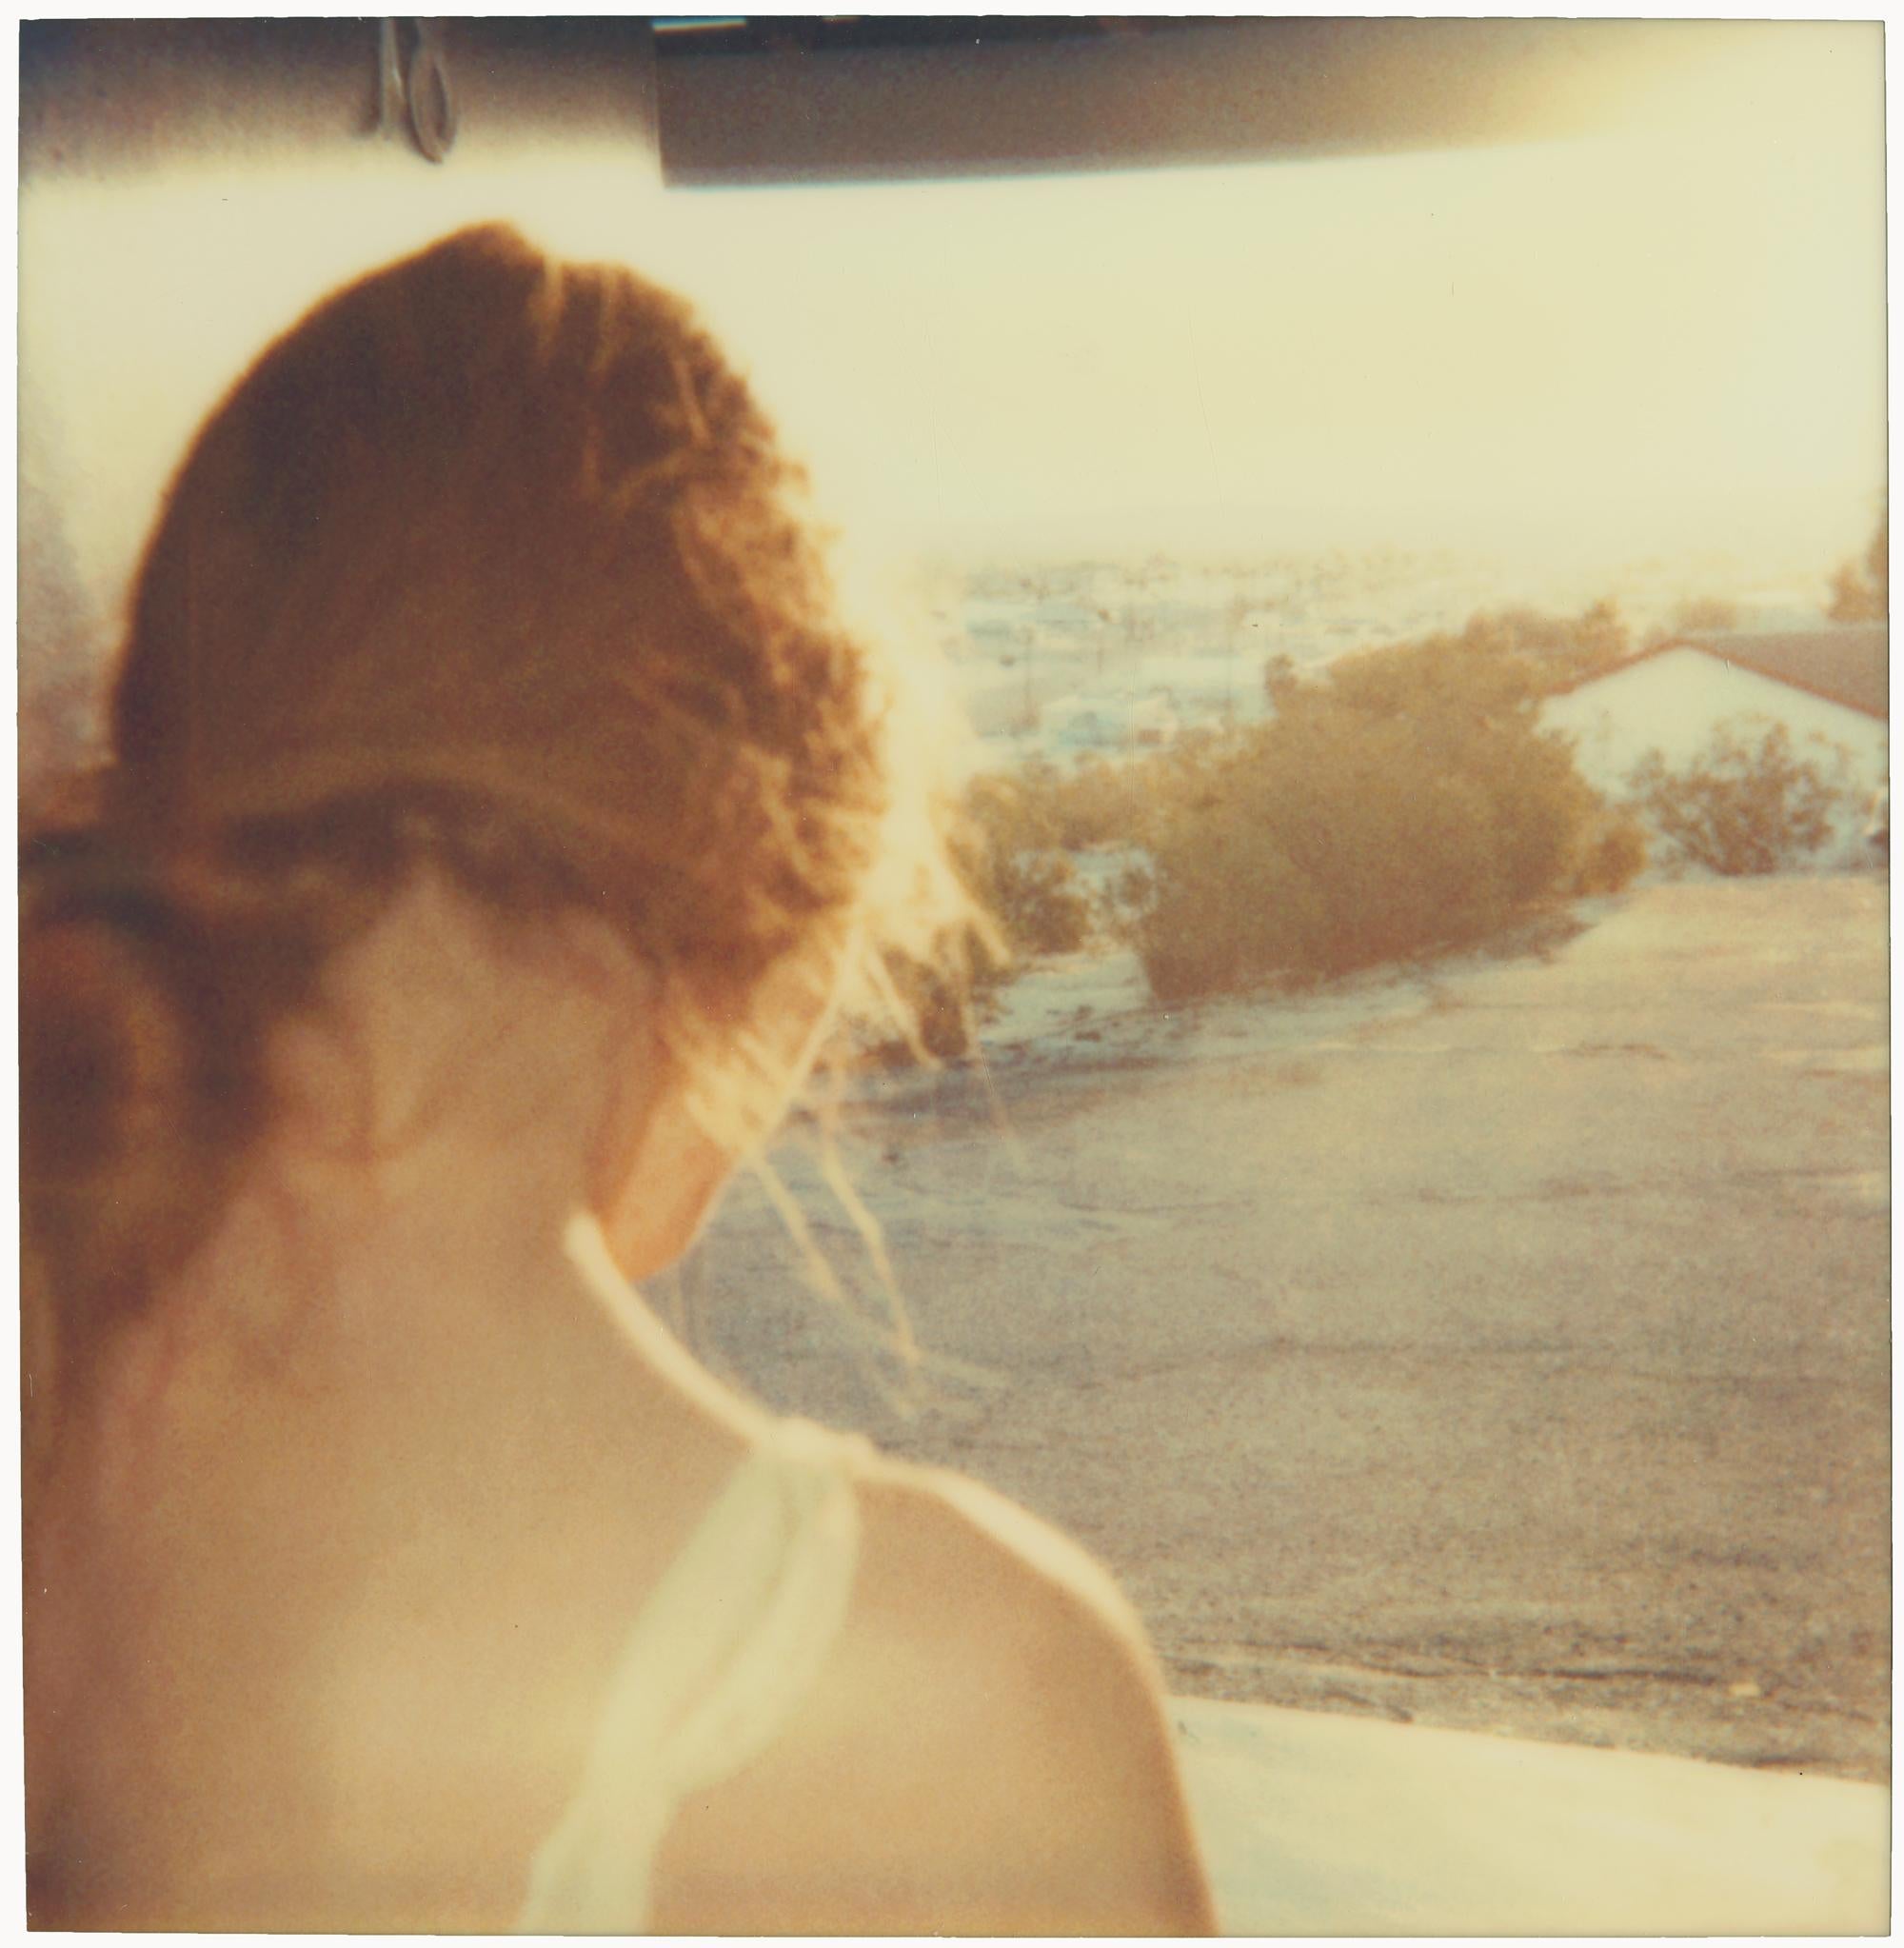 Hillview Motel (Last Picture Show) - analog, mounted, based on 3 Polaroids - Contemporary Photograph by Stefanie Schneider